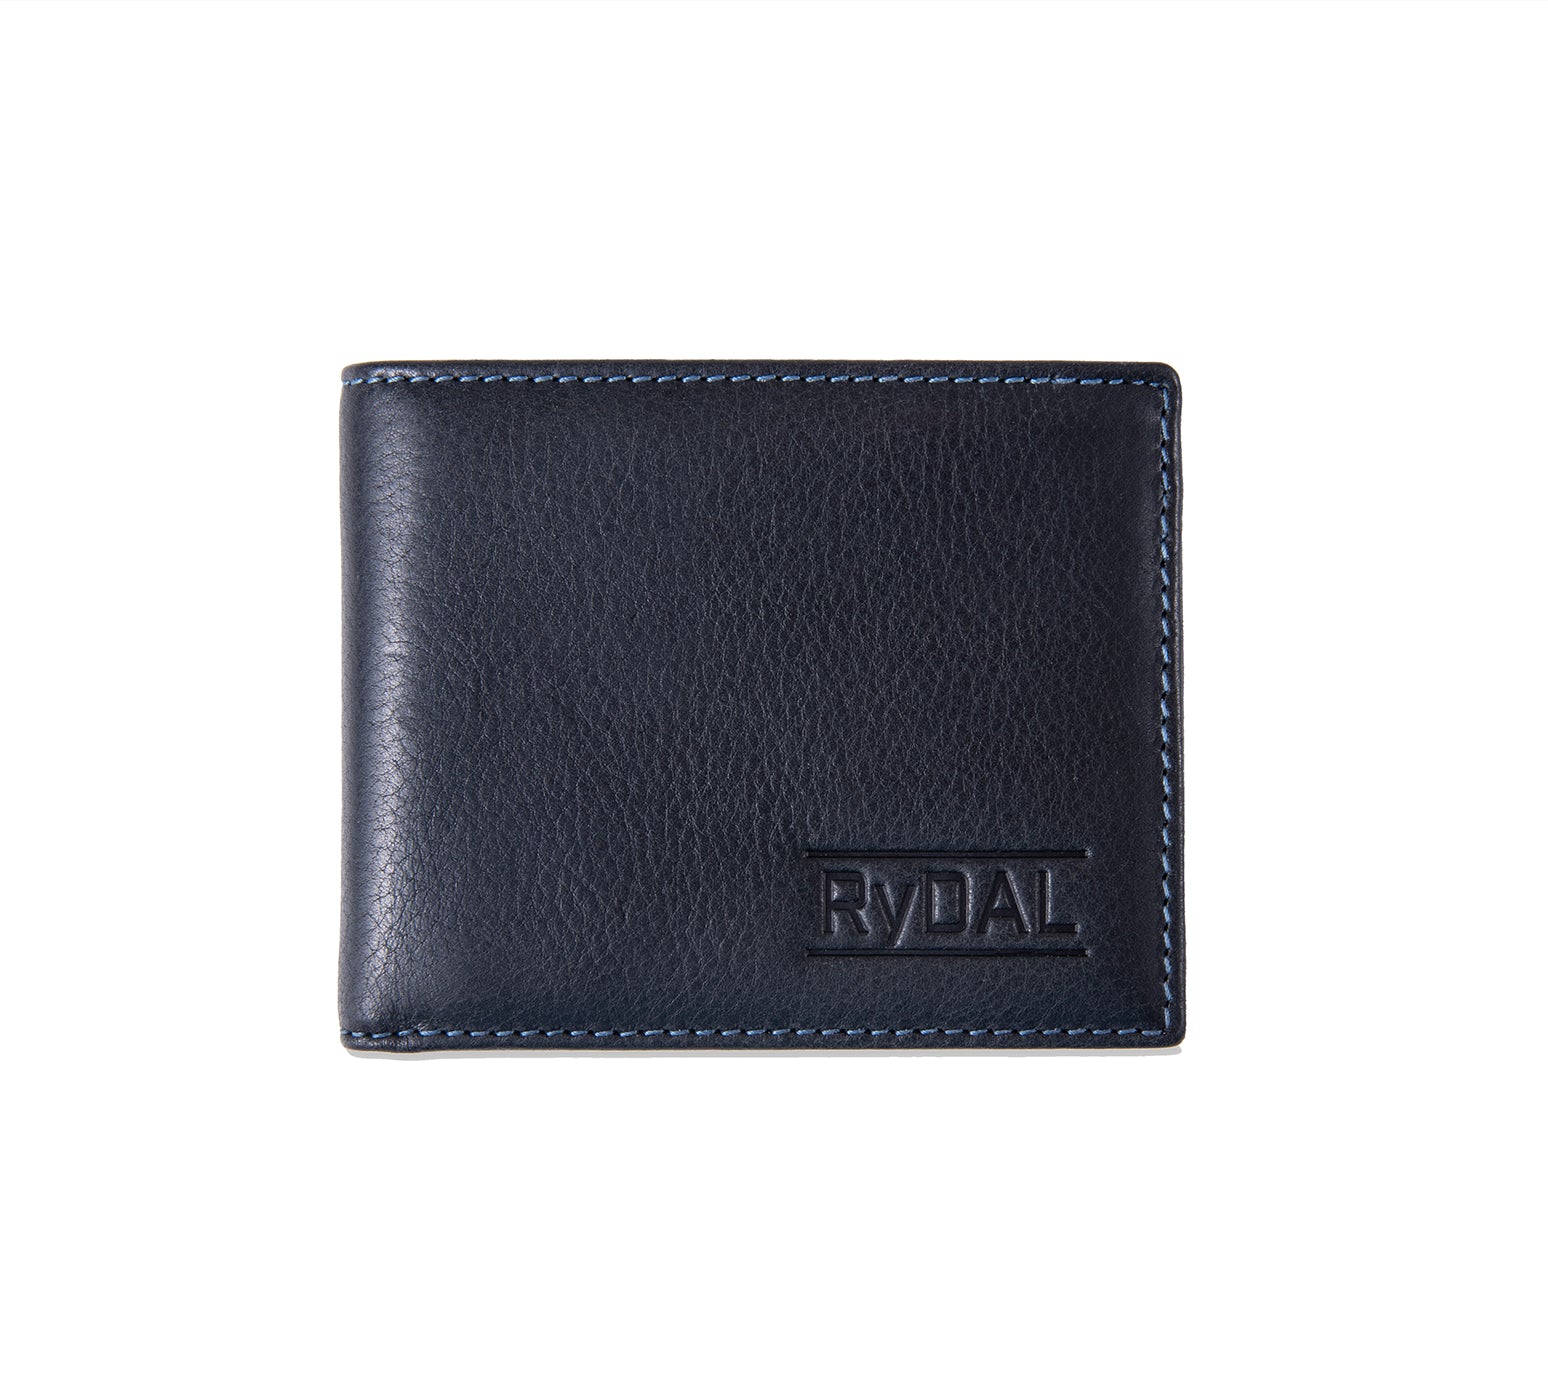 Mens Leather Wallet from Rydal in 'Black/Royal Blue'.